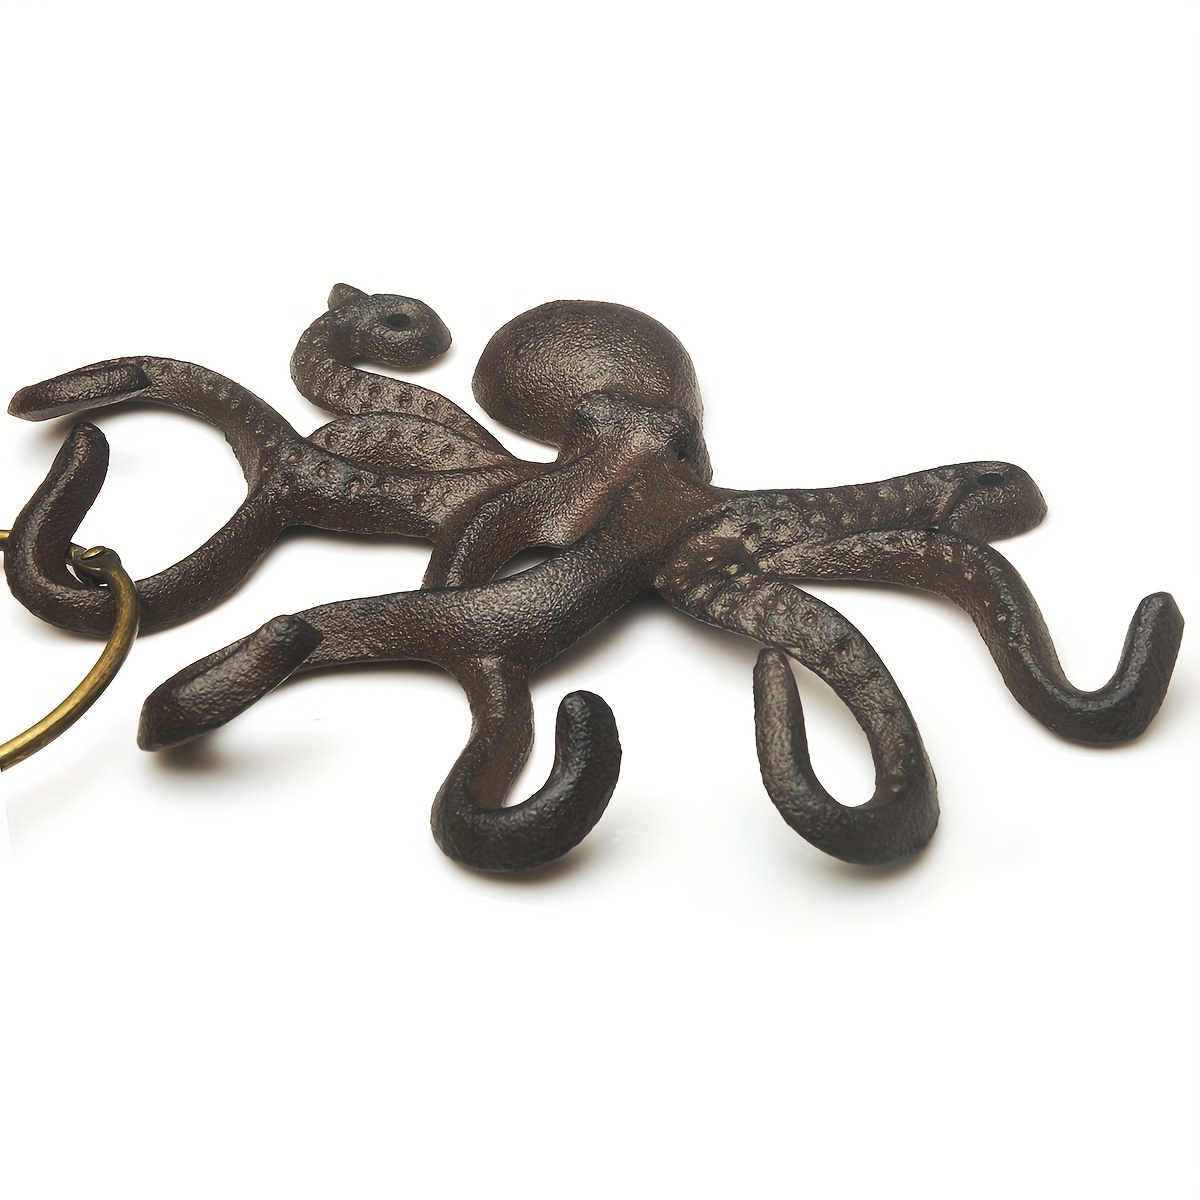 1pc Key Holder For Wall, Octopus Coat Hooks Wall Mounted Towel Hooks, Heavy  Duty Wall Hooks Decorative With 6 Arms